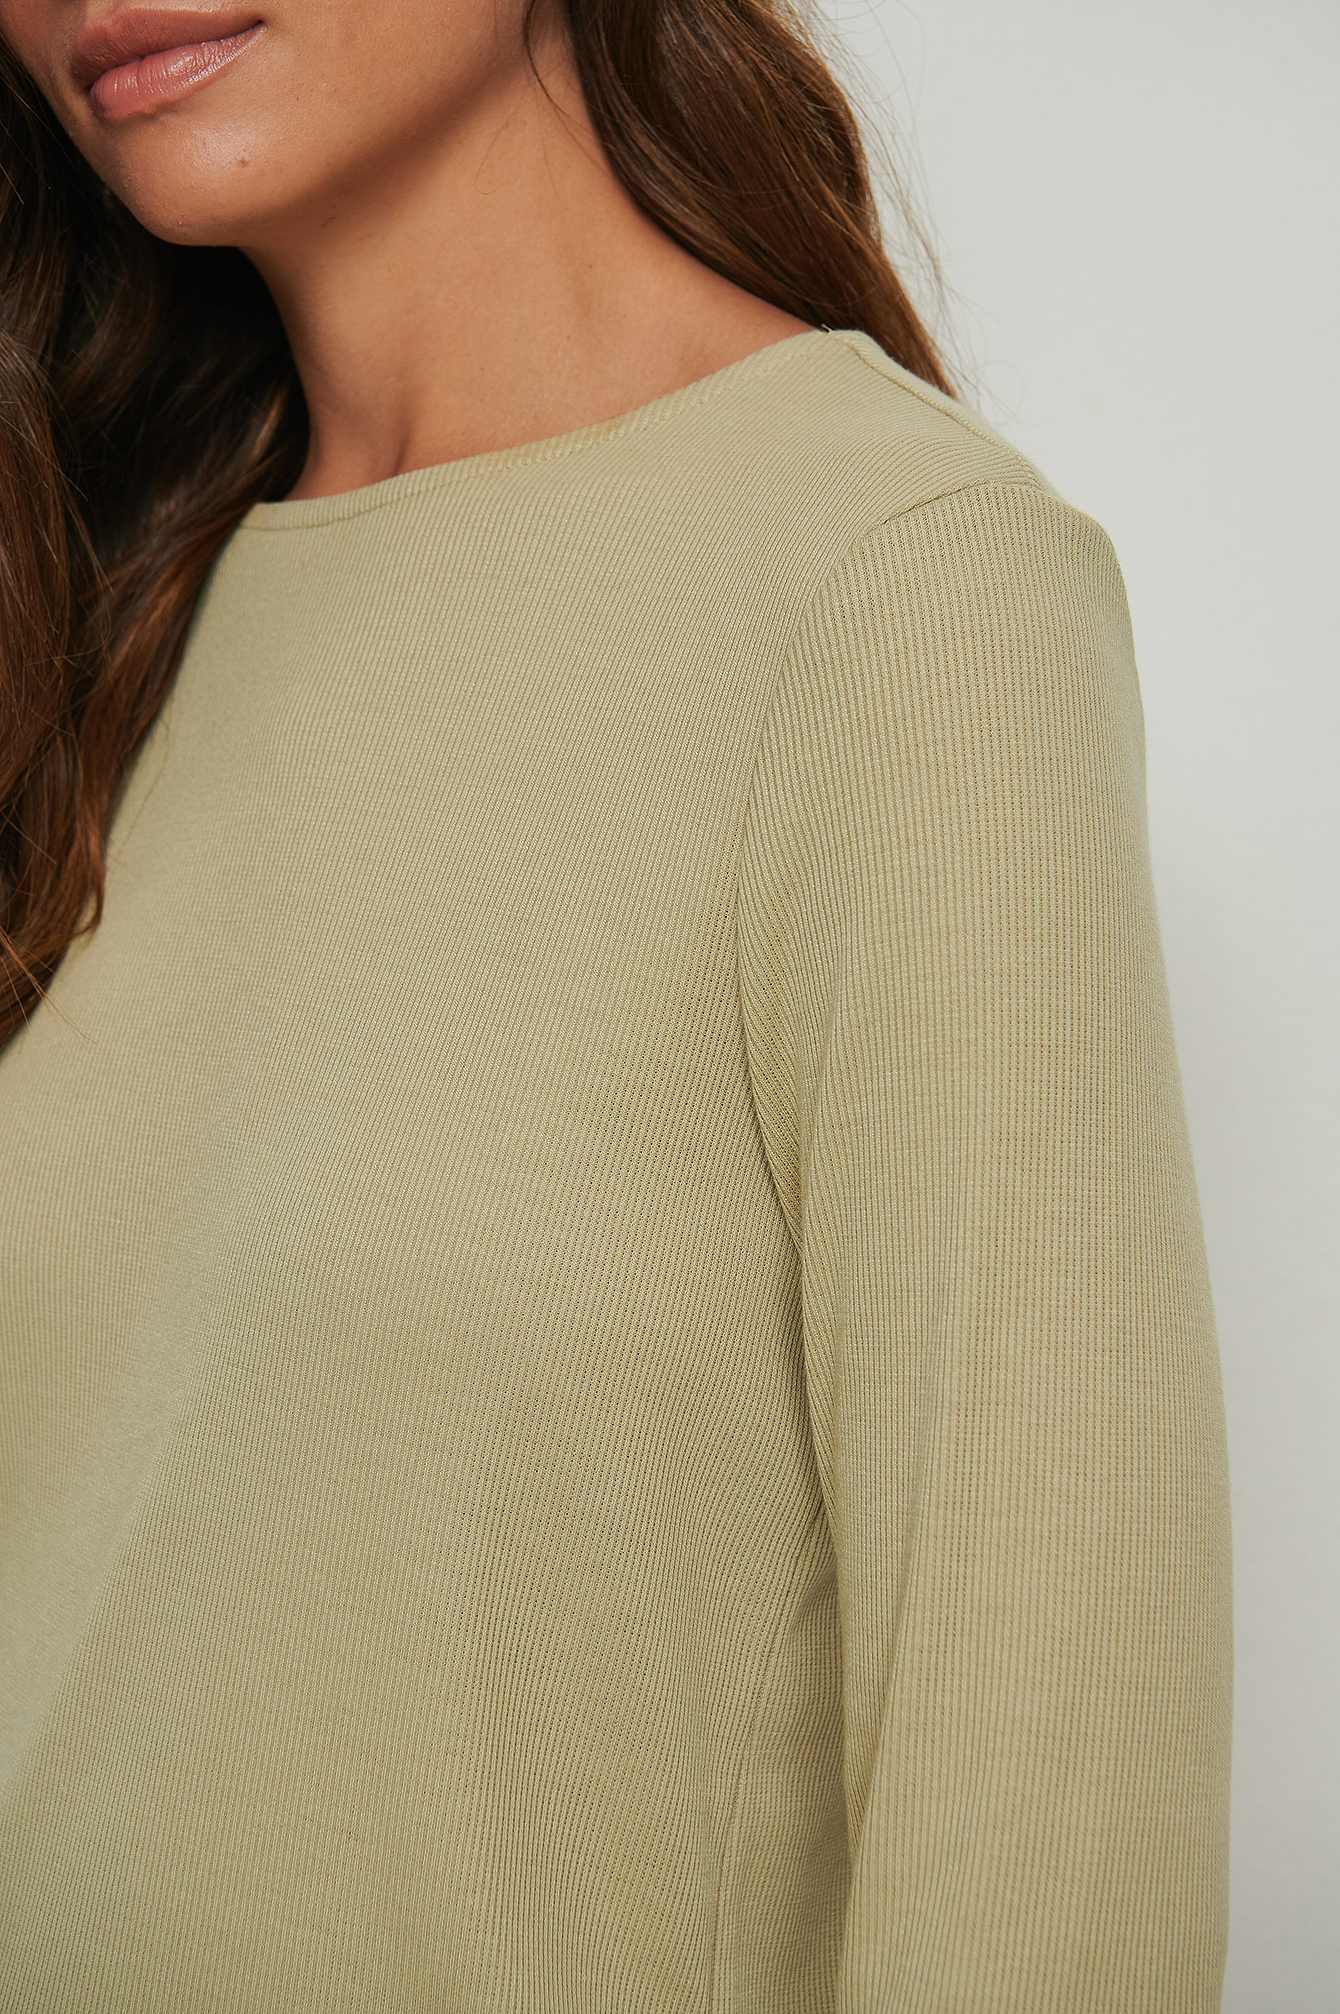 Olive Green Soft Ribbed Round Neck Top